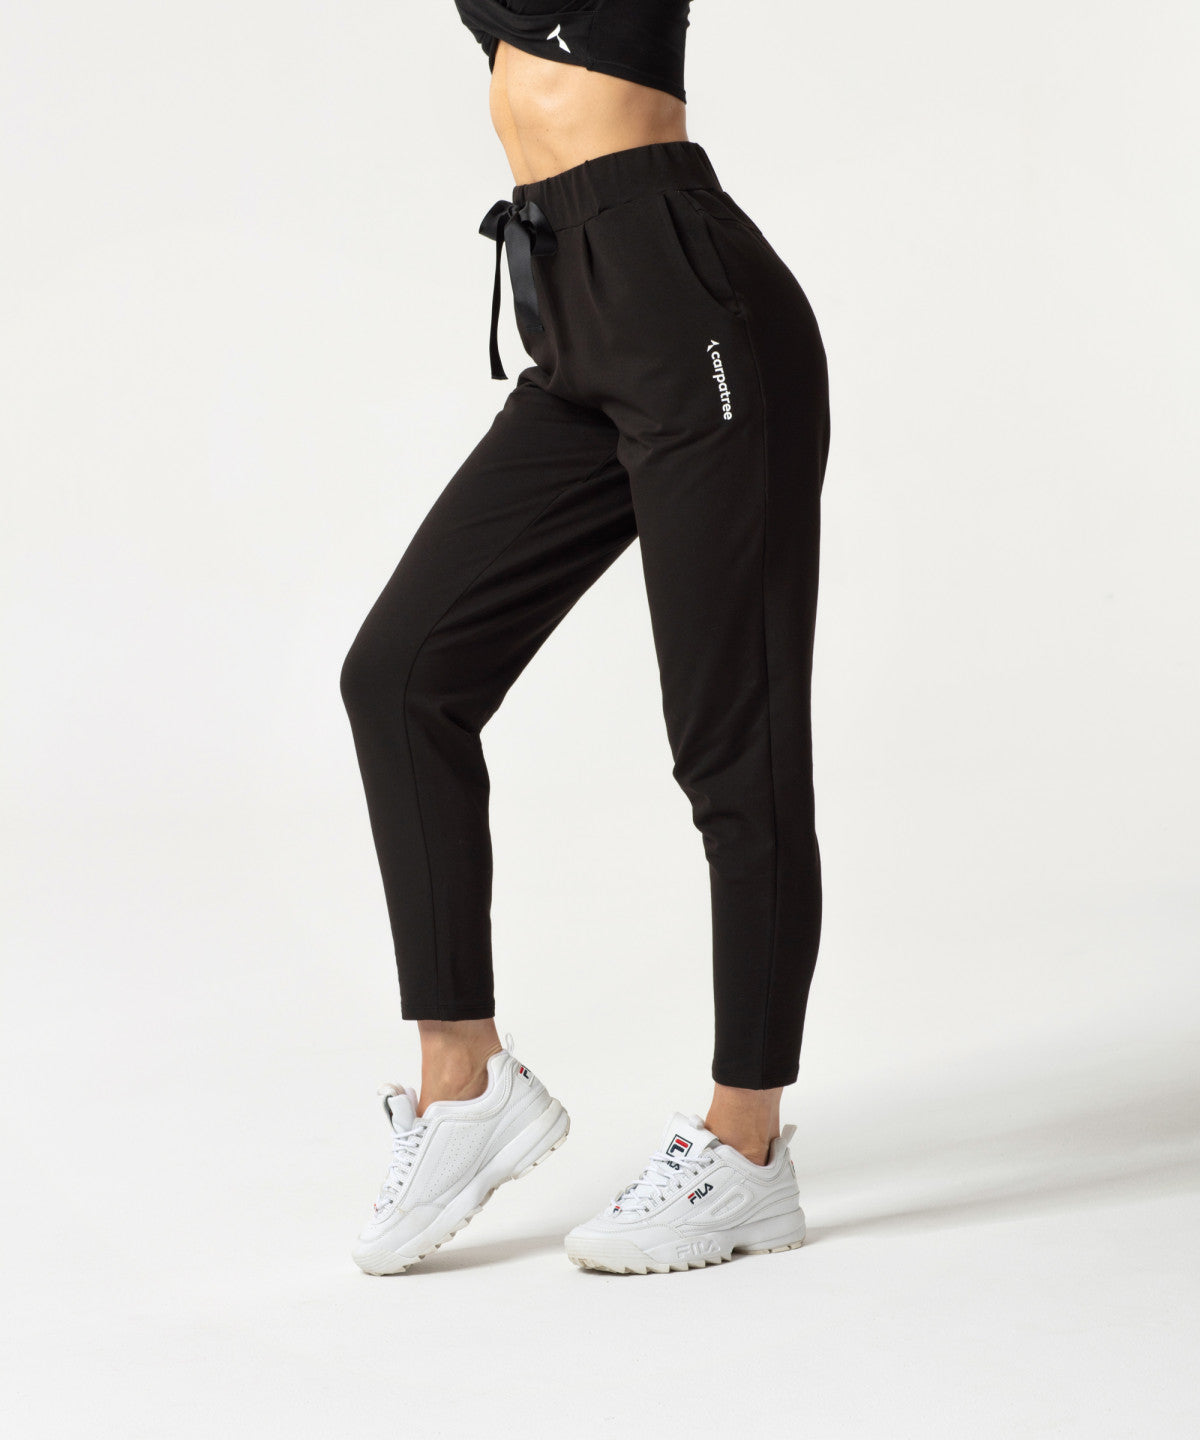 Carpatree Ultimate Tied Sweatpants - Black jogger style tracksuit bottoms with ribbon tie, elasticated waist and pockets. Made of strong stretch cotton.